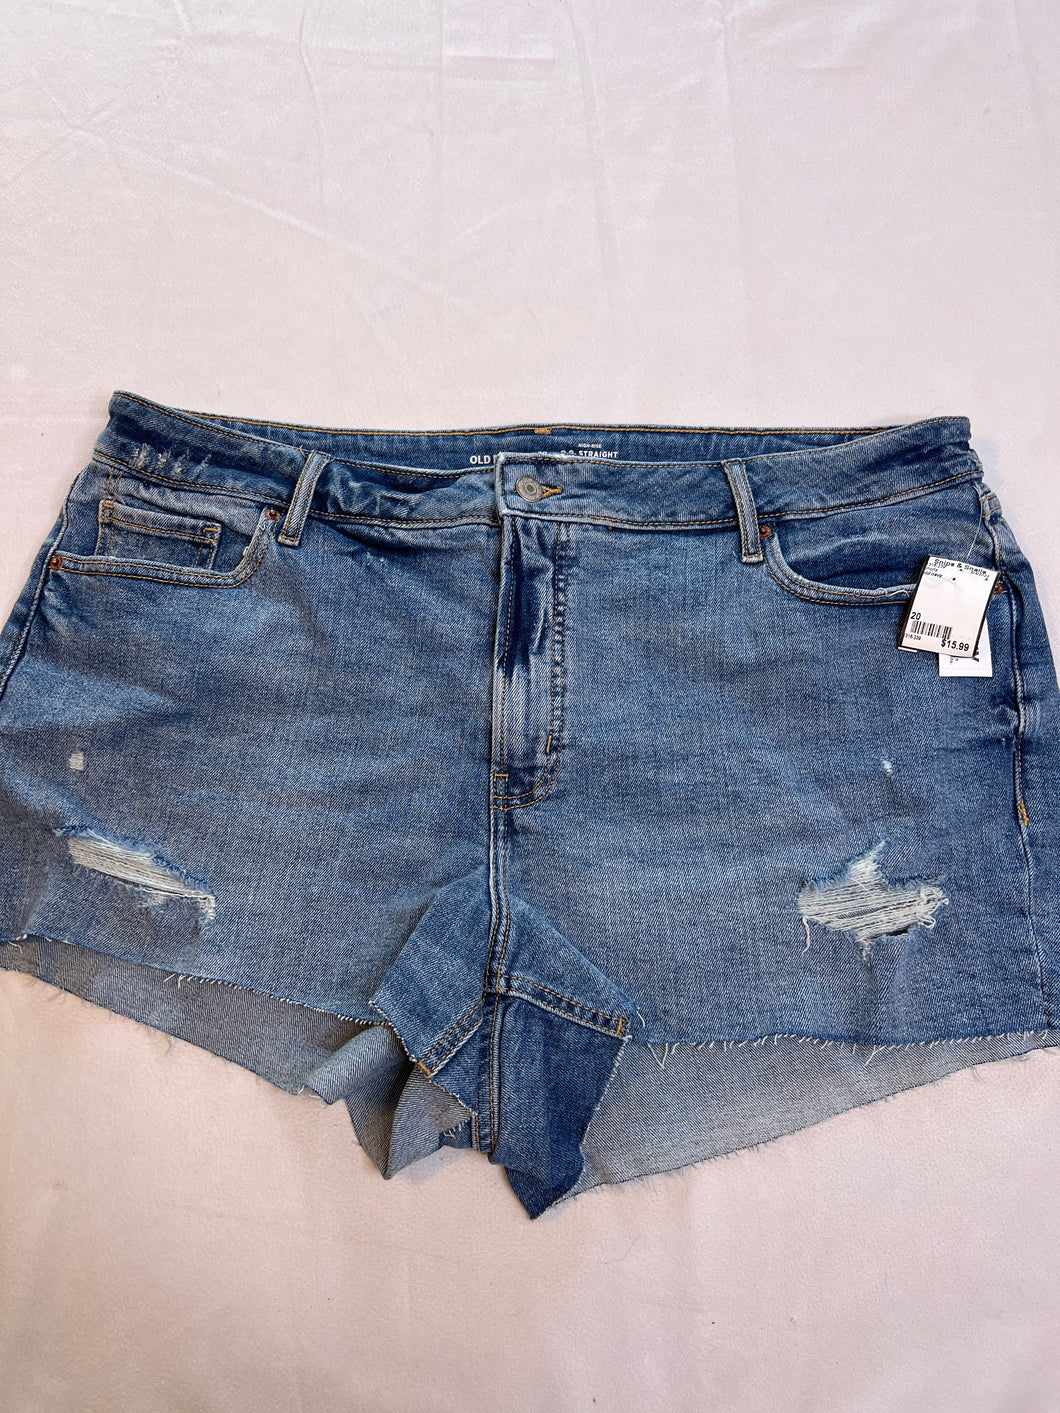 Womens BNWT Size 20 old navy Shorts